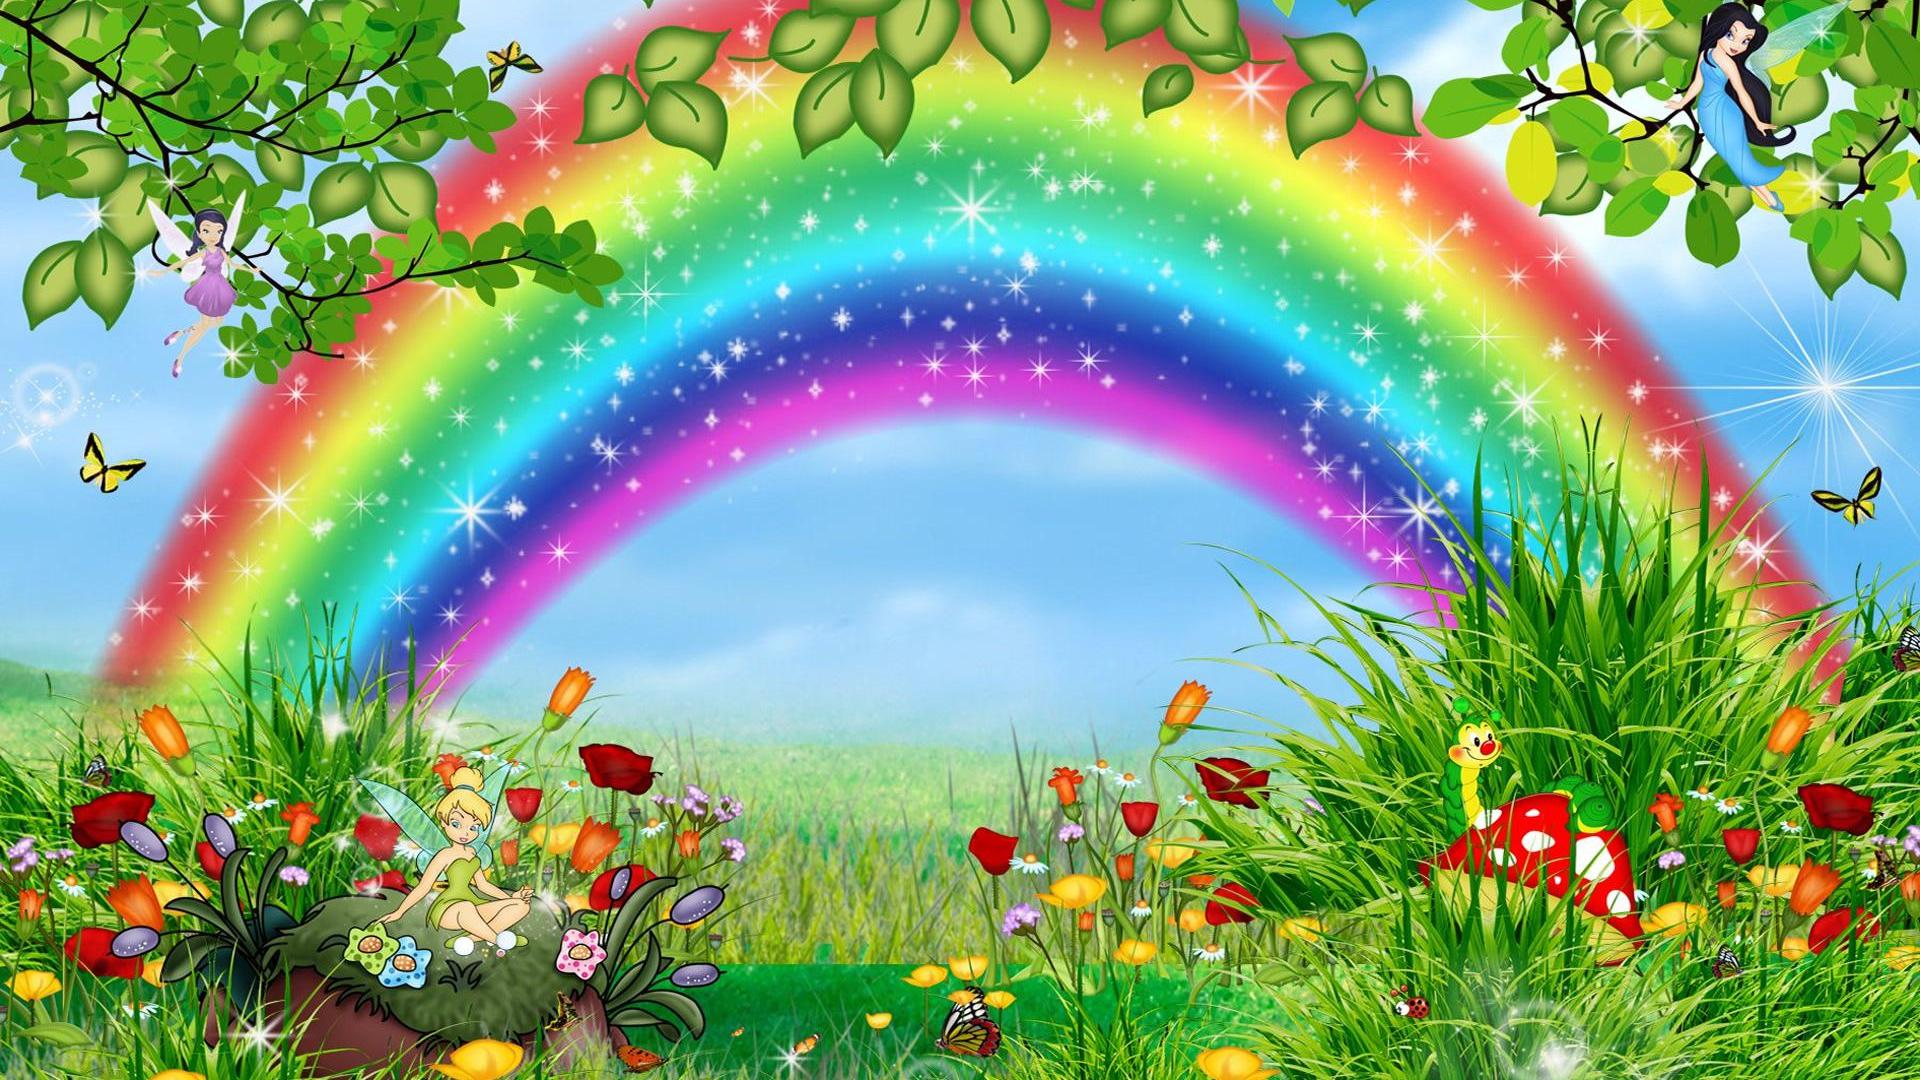 Rainbow HD Wallpapers   Wallpaper High Definition High Quality